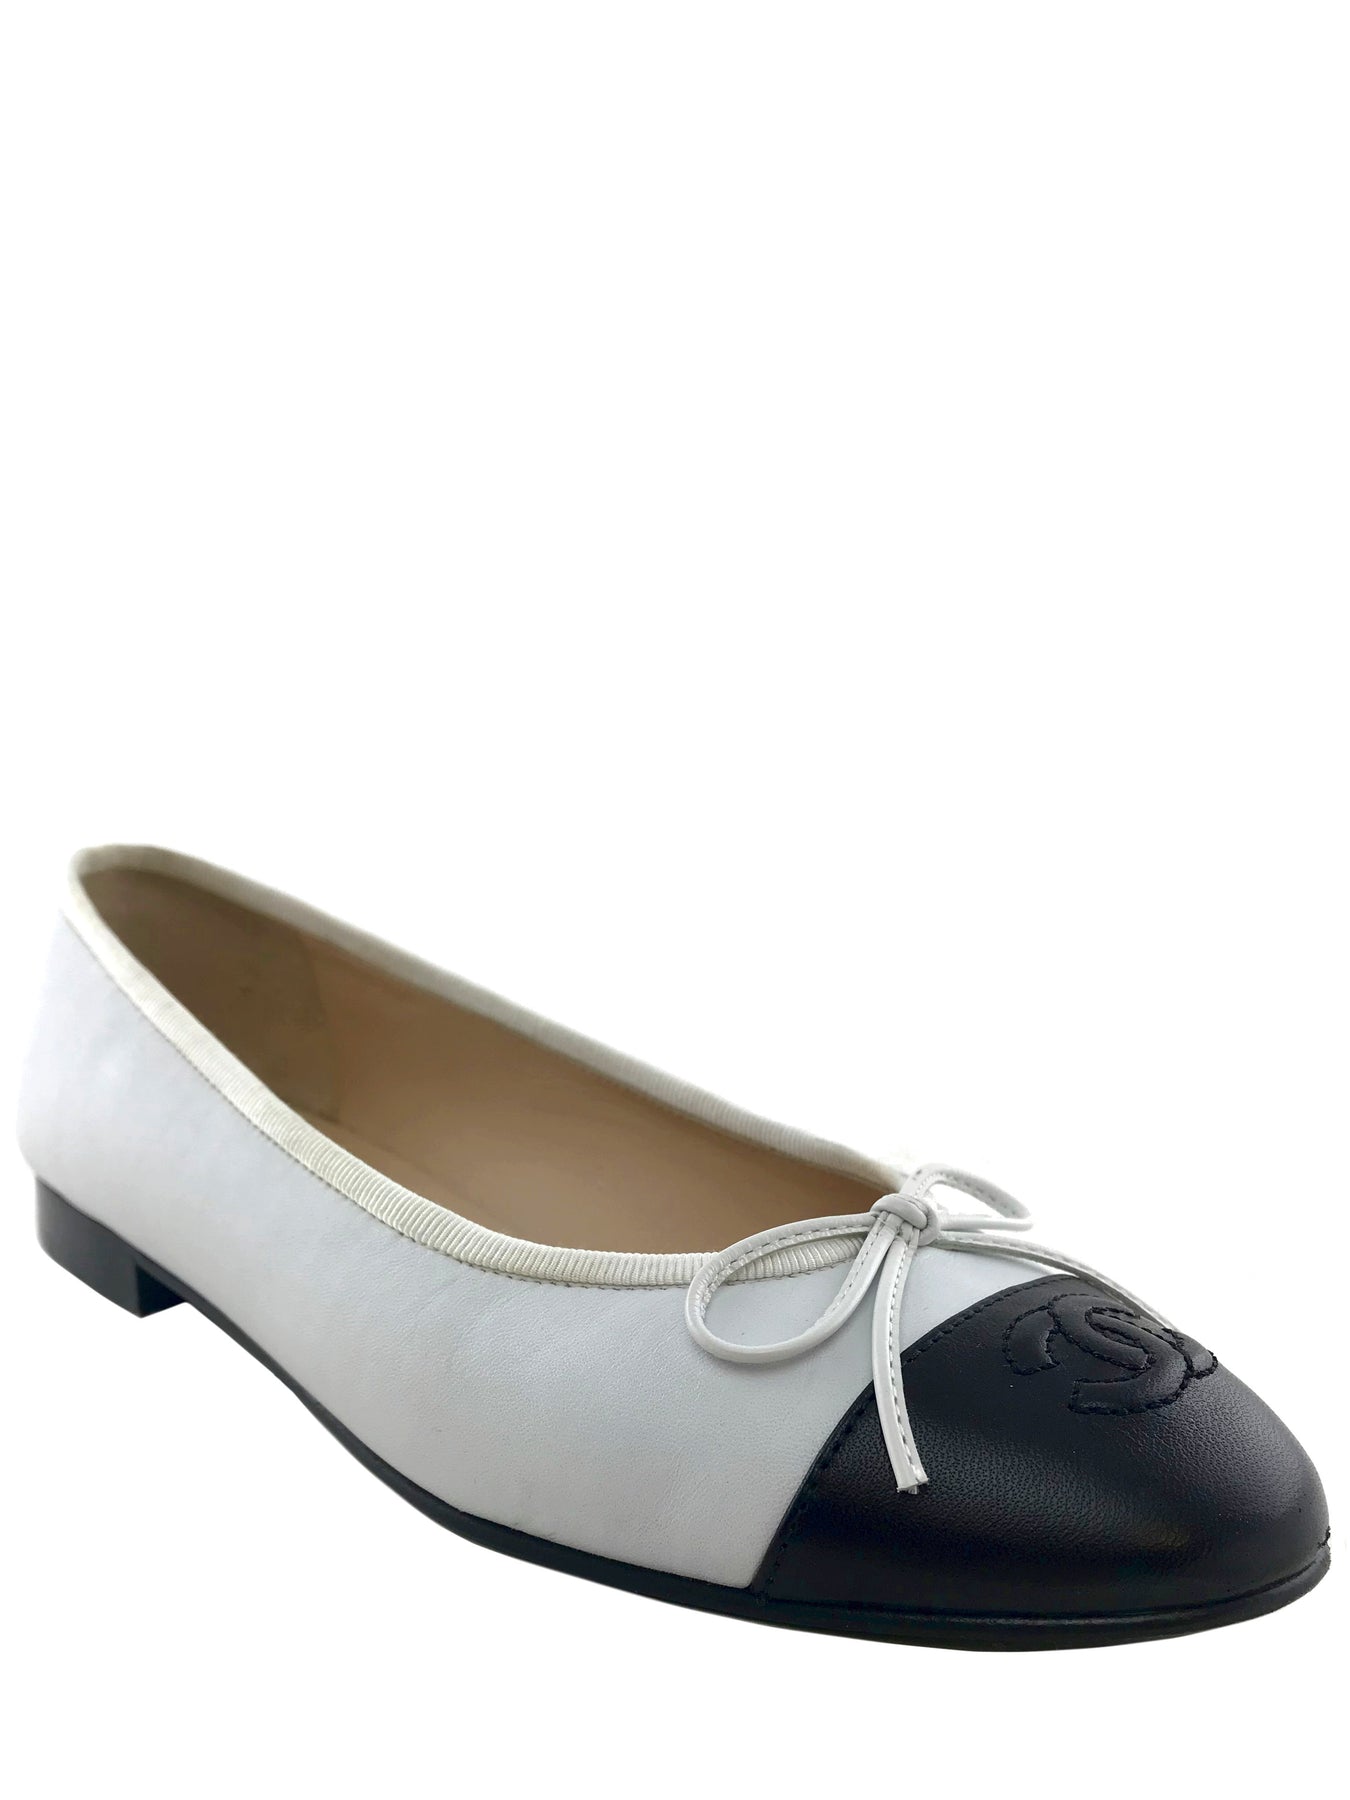 Chanel CC Cap Toe Lambskin Leather Ballet Flats Size 8 - Consigned Designs